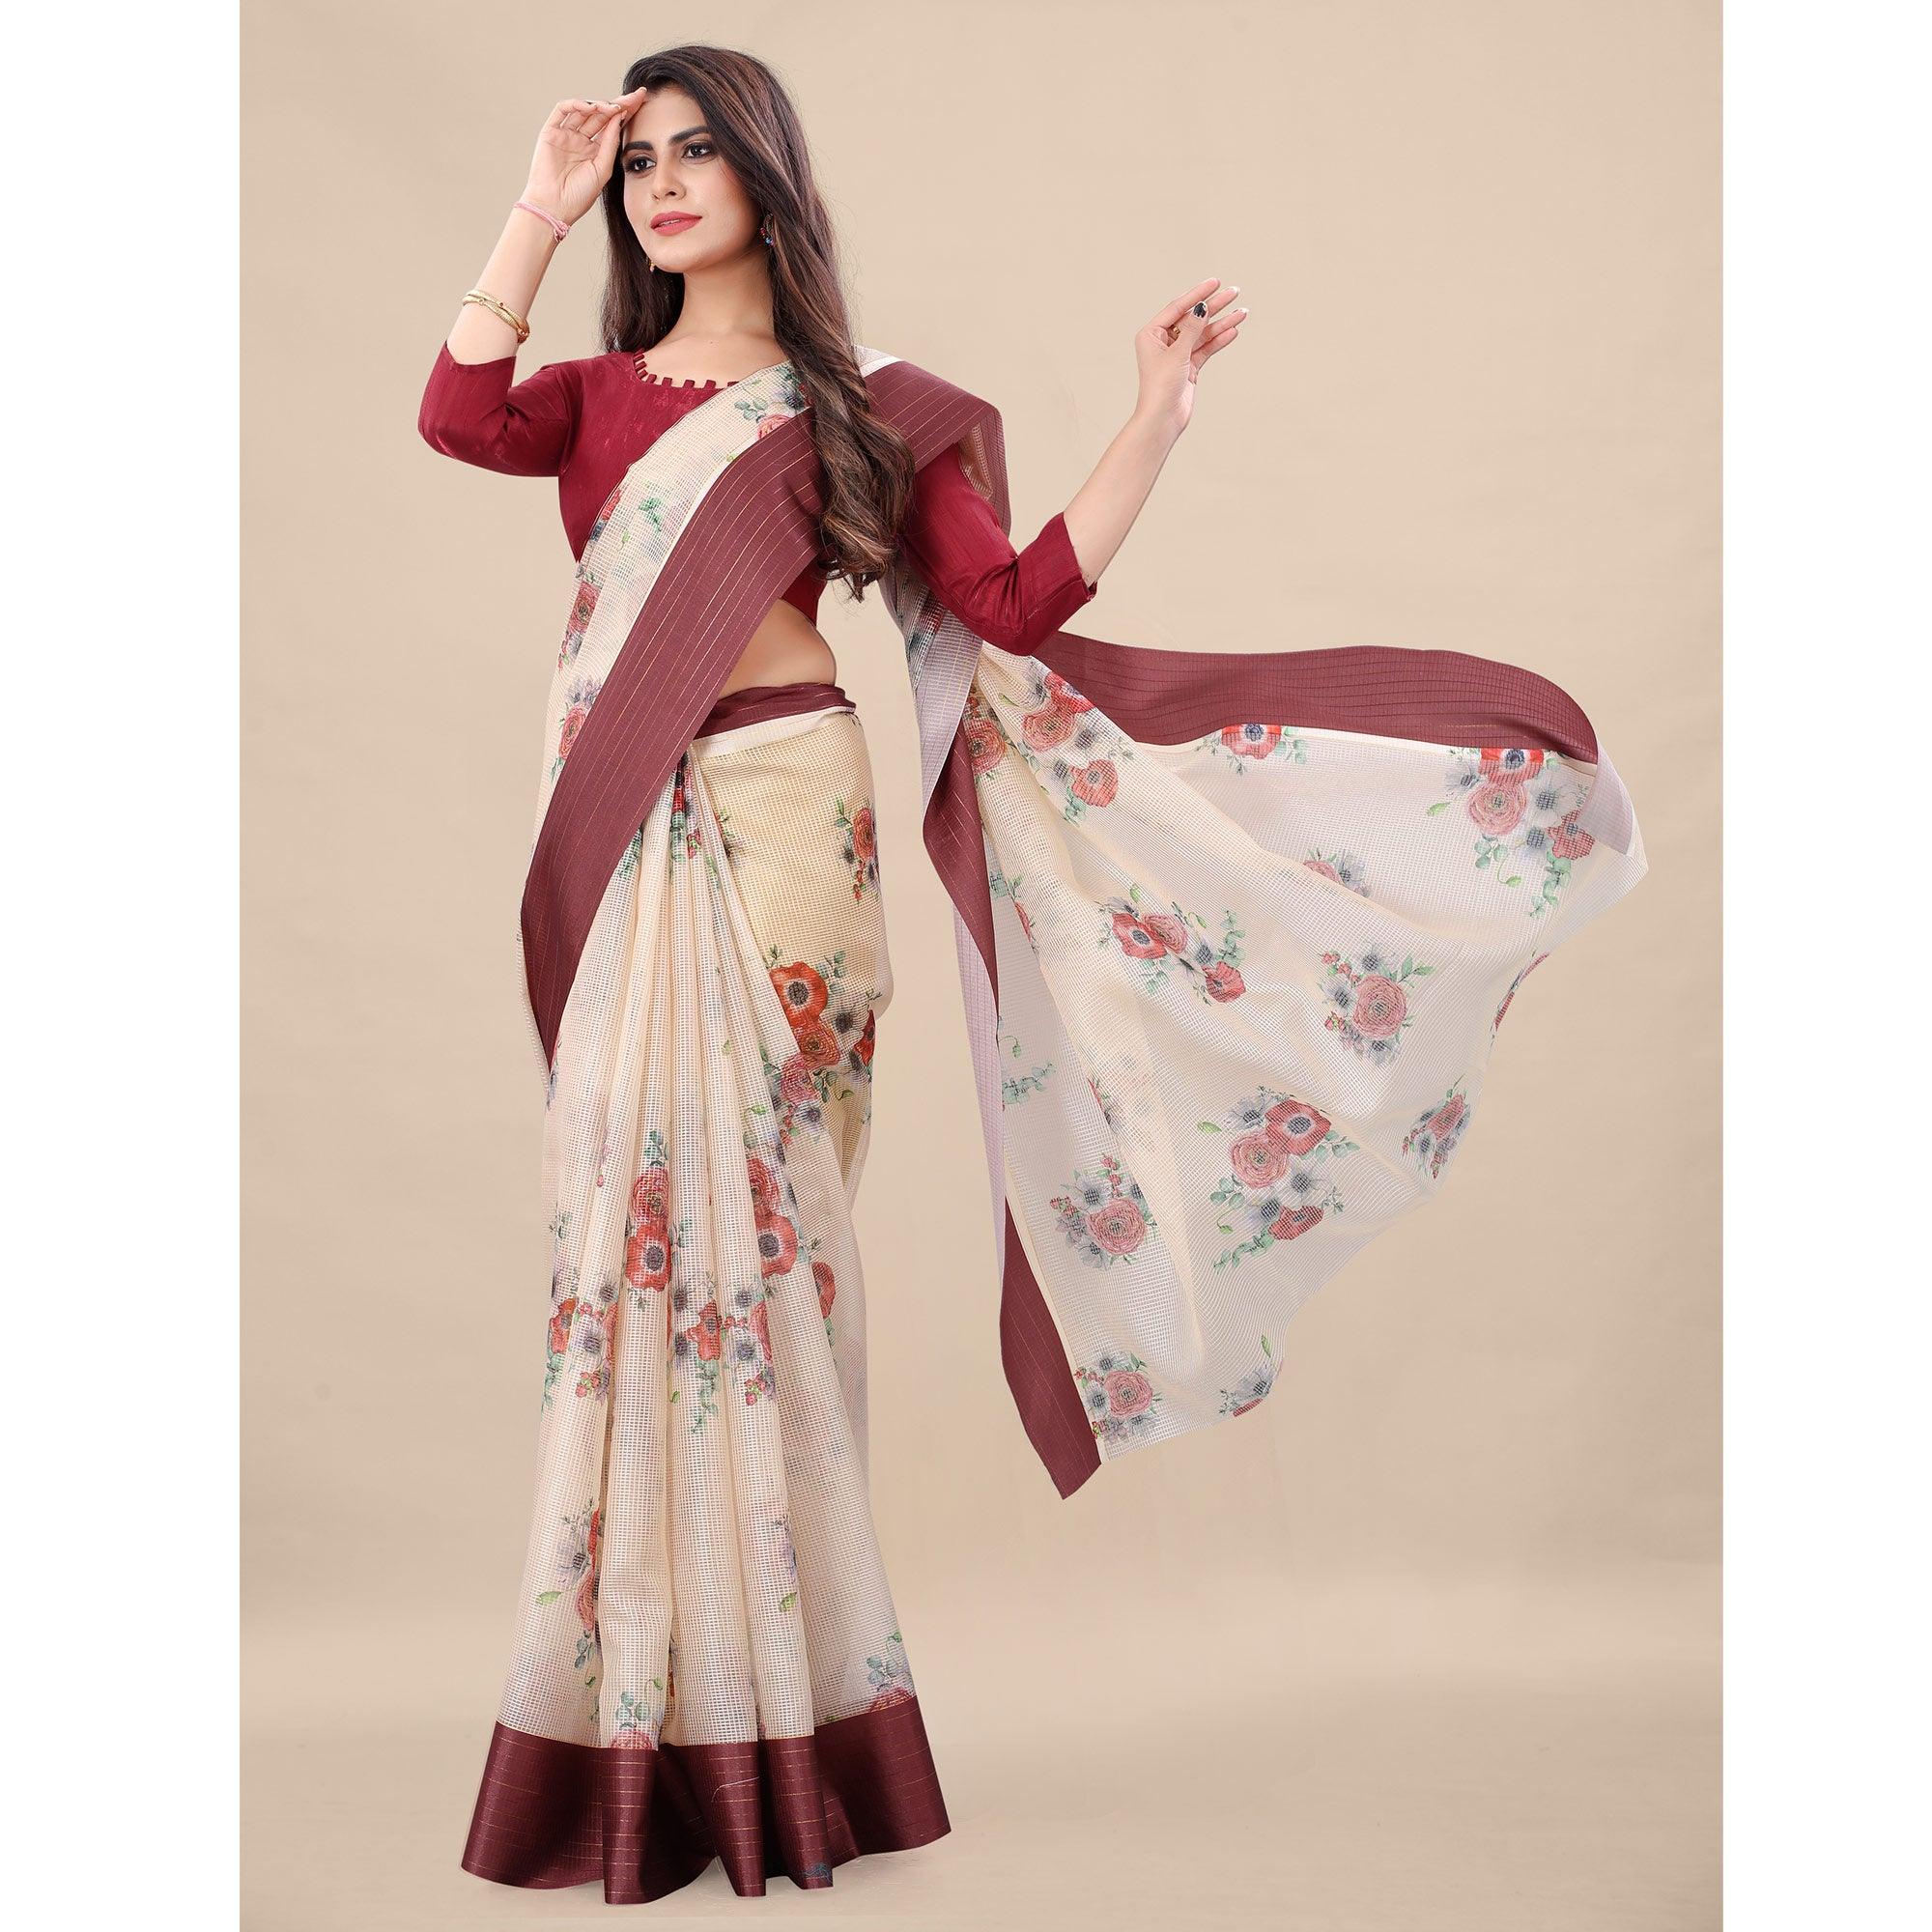 Offwhite - Maroon Casual Wear Floral Digital Printed Silk Saree With Woven Border - Peachmode